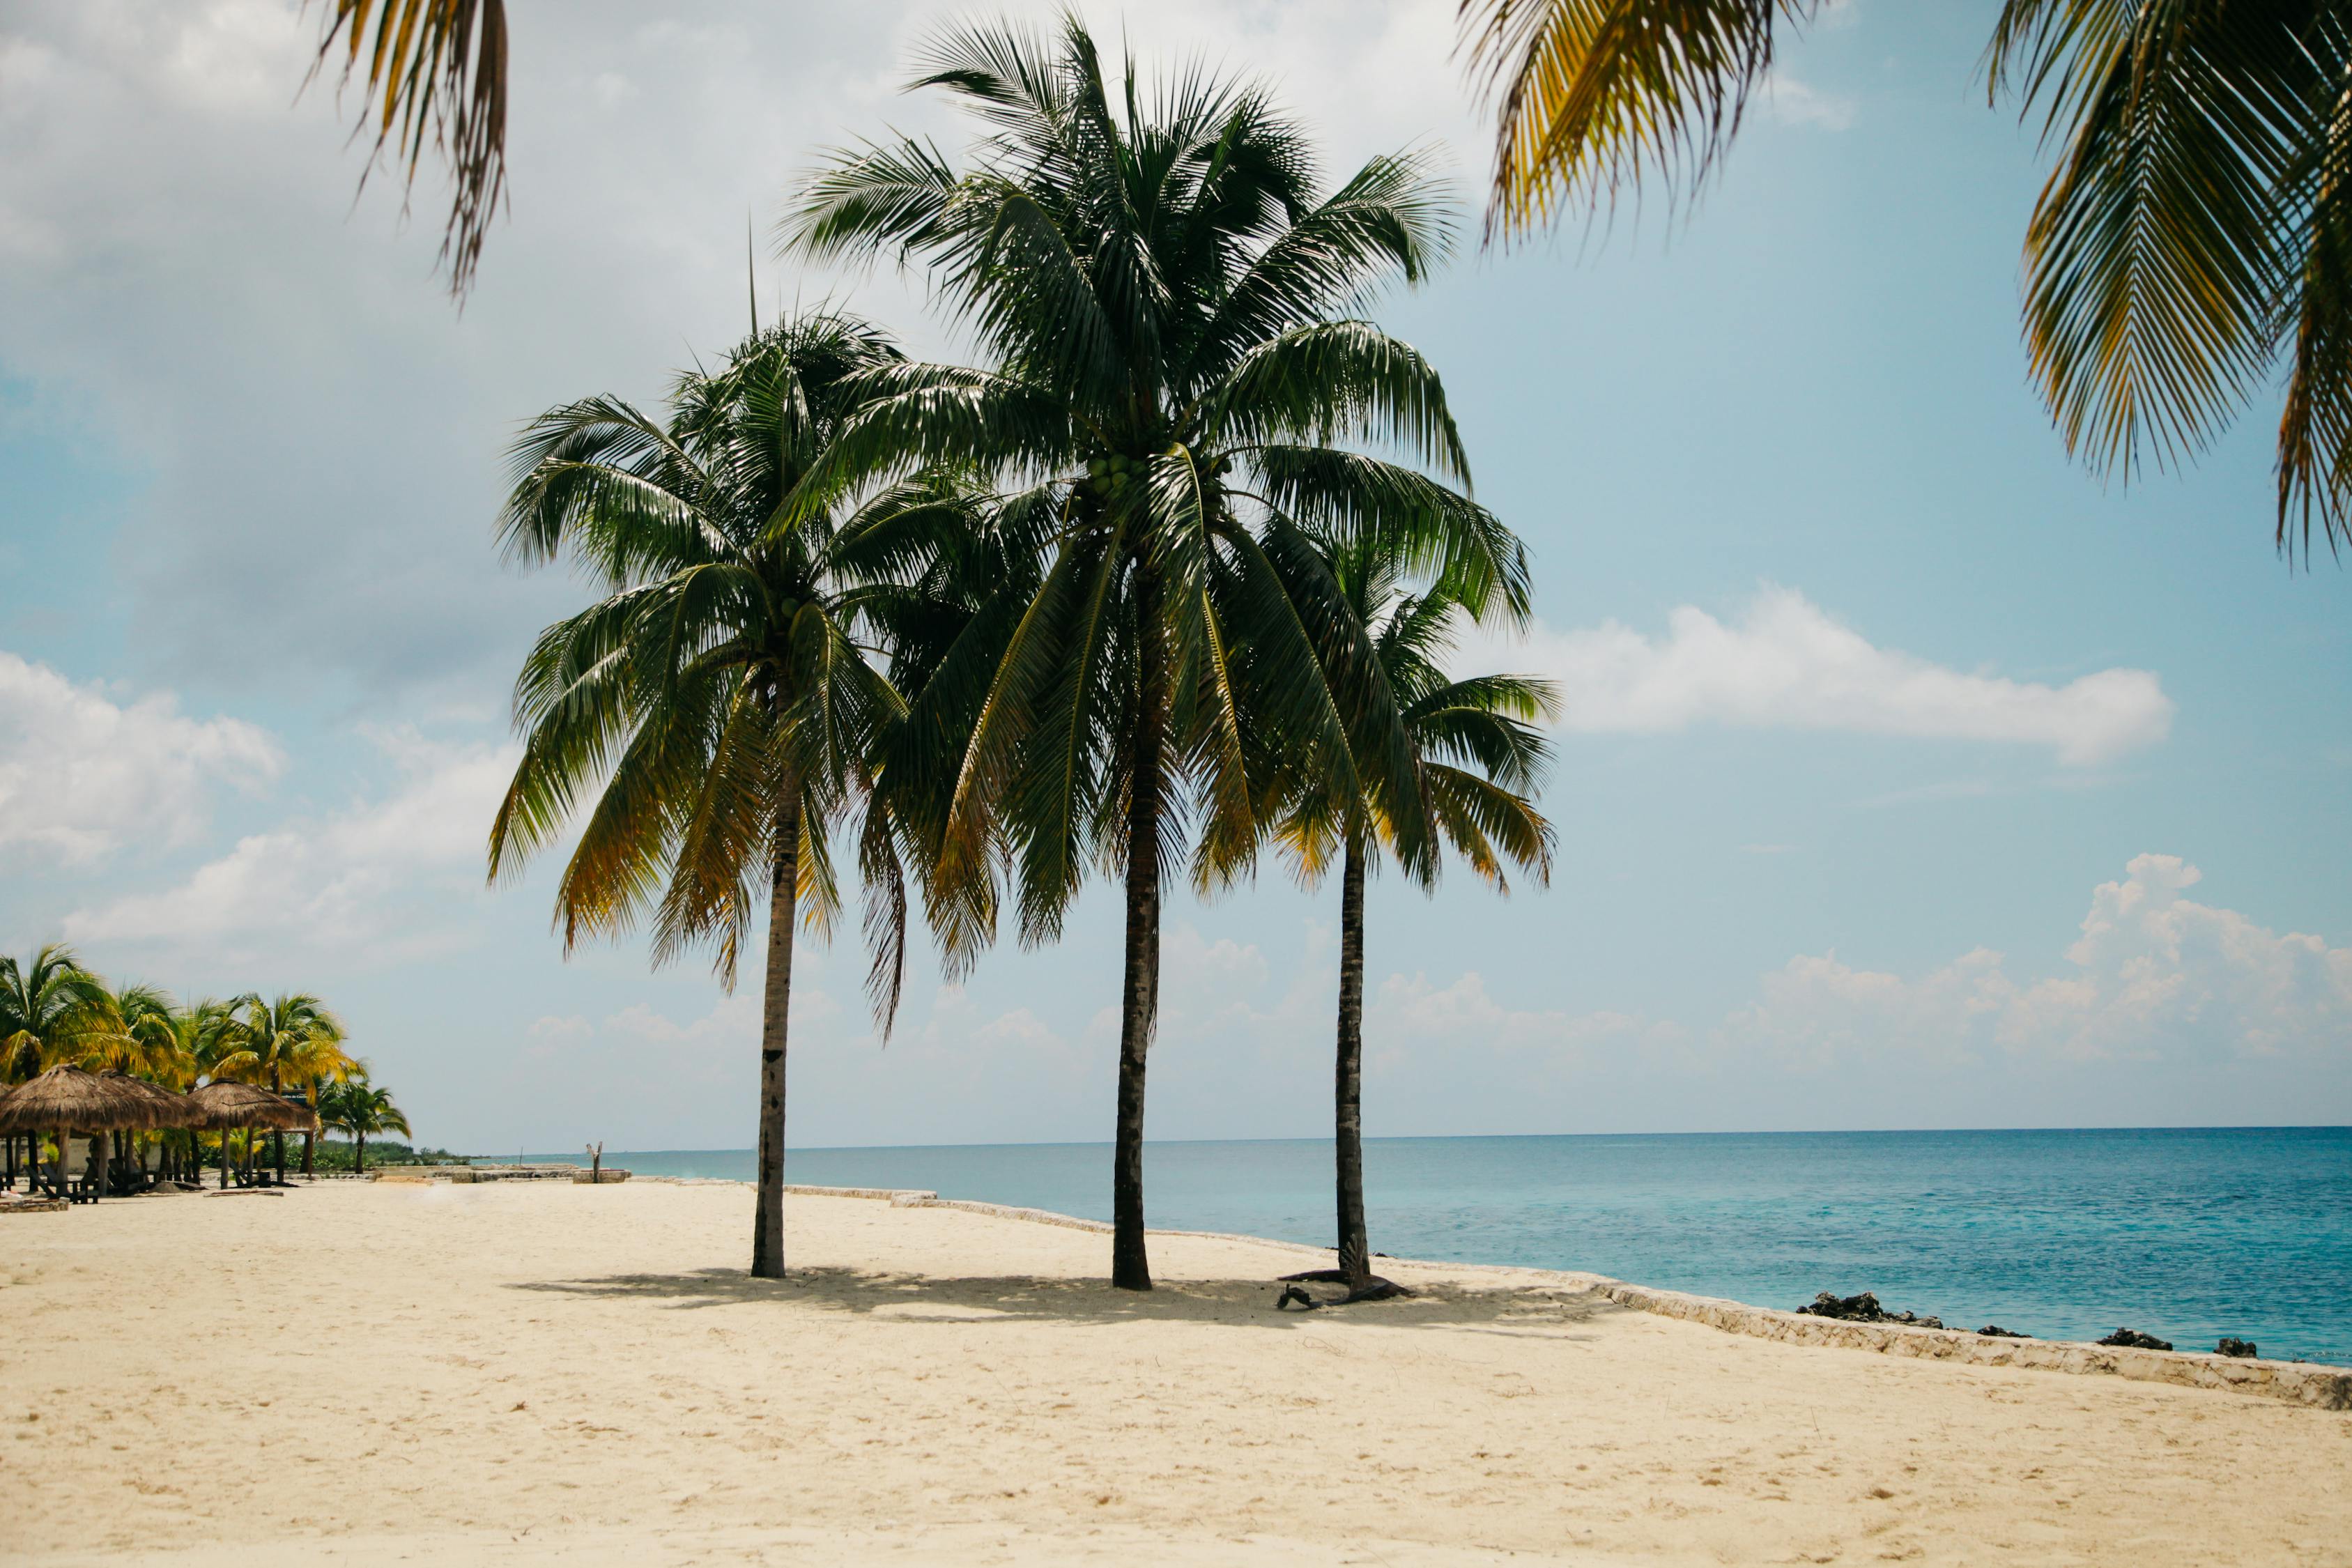 Coconut Tree on the Beach during Daytime · Free Stock Photo